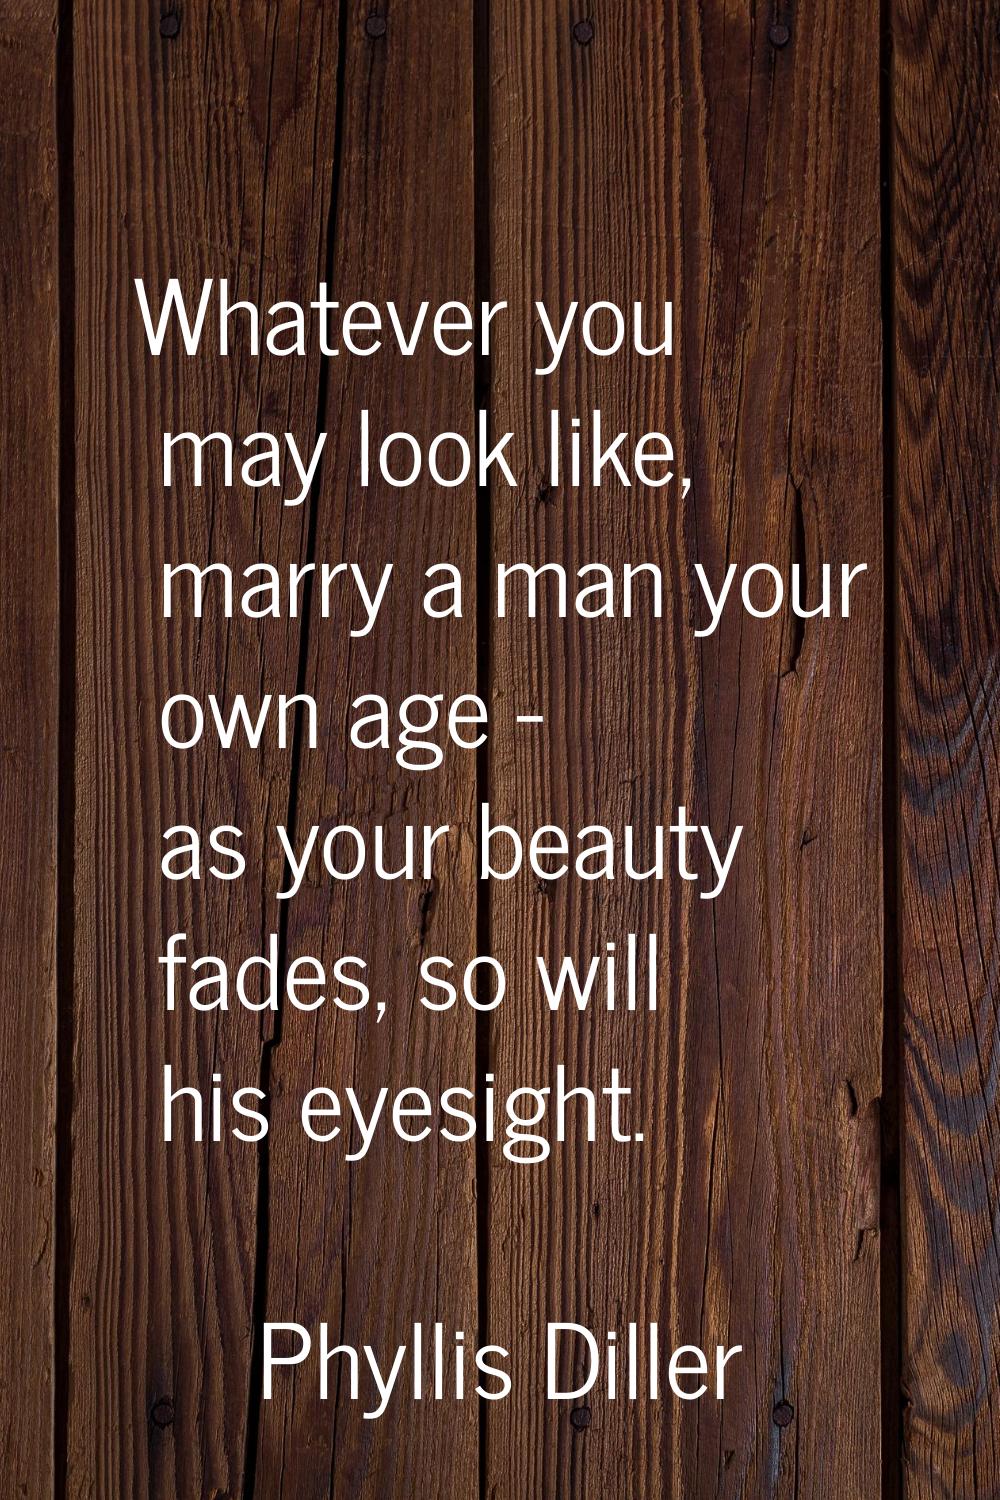 Whatever you may look like, marry a man your own age - as your beauty fades, so will his eyesight.